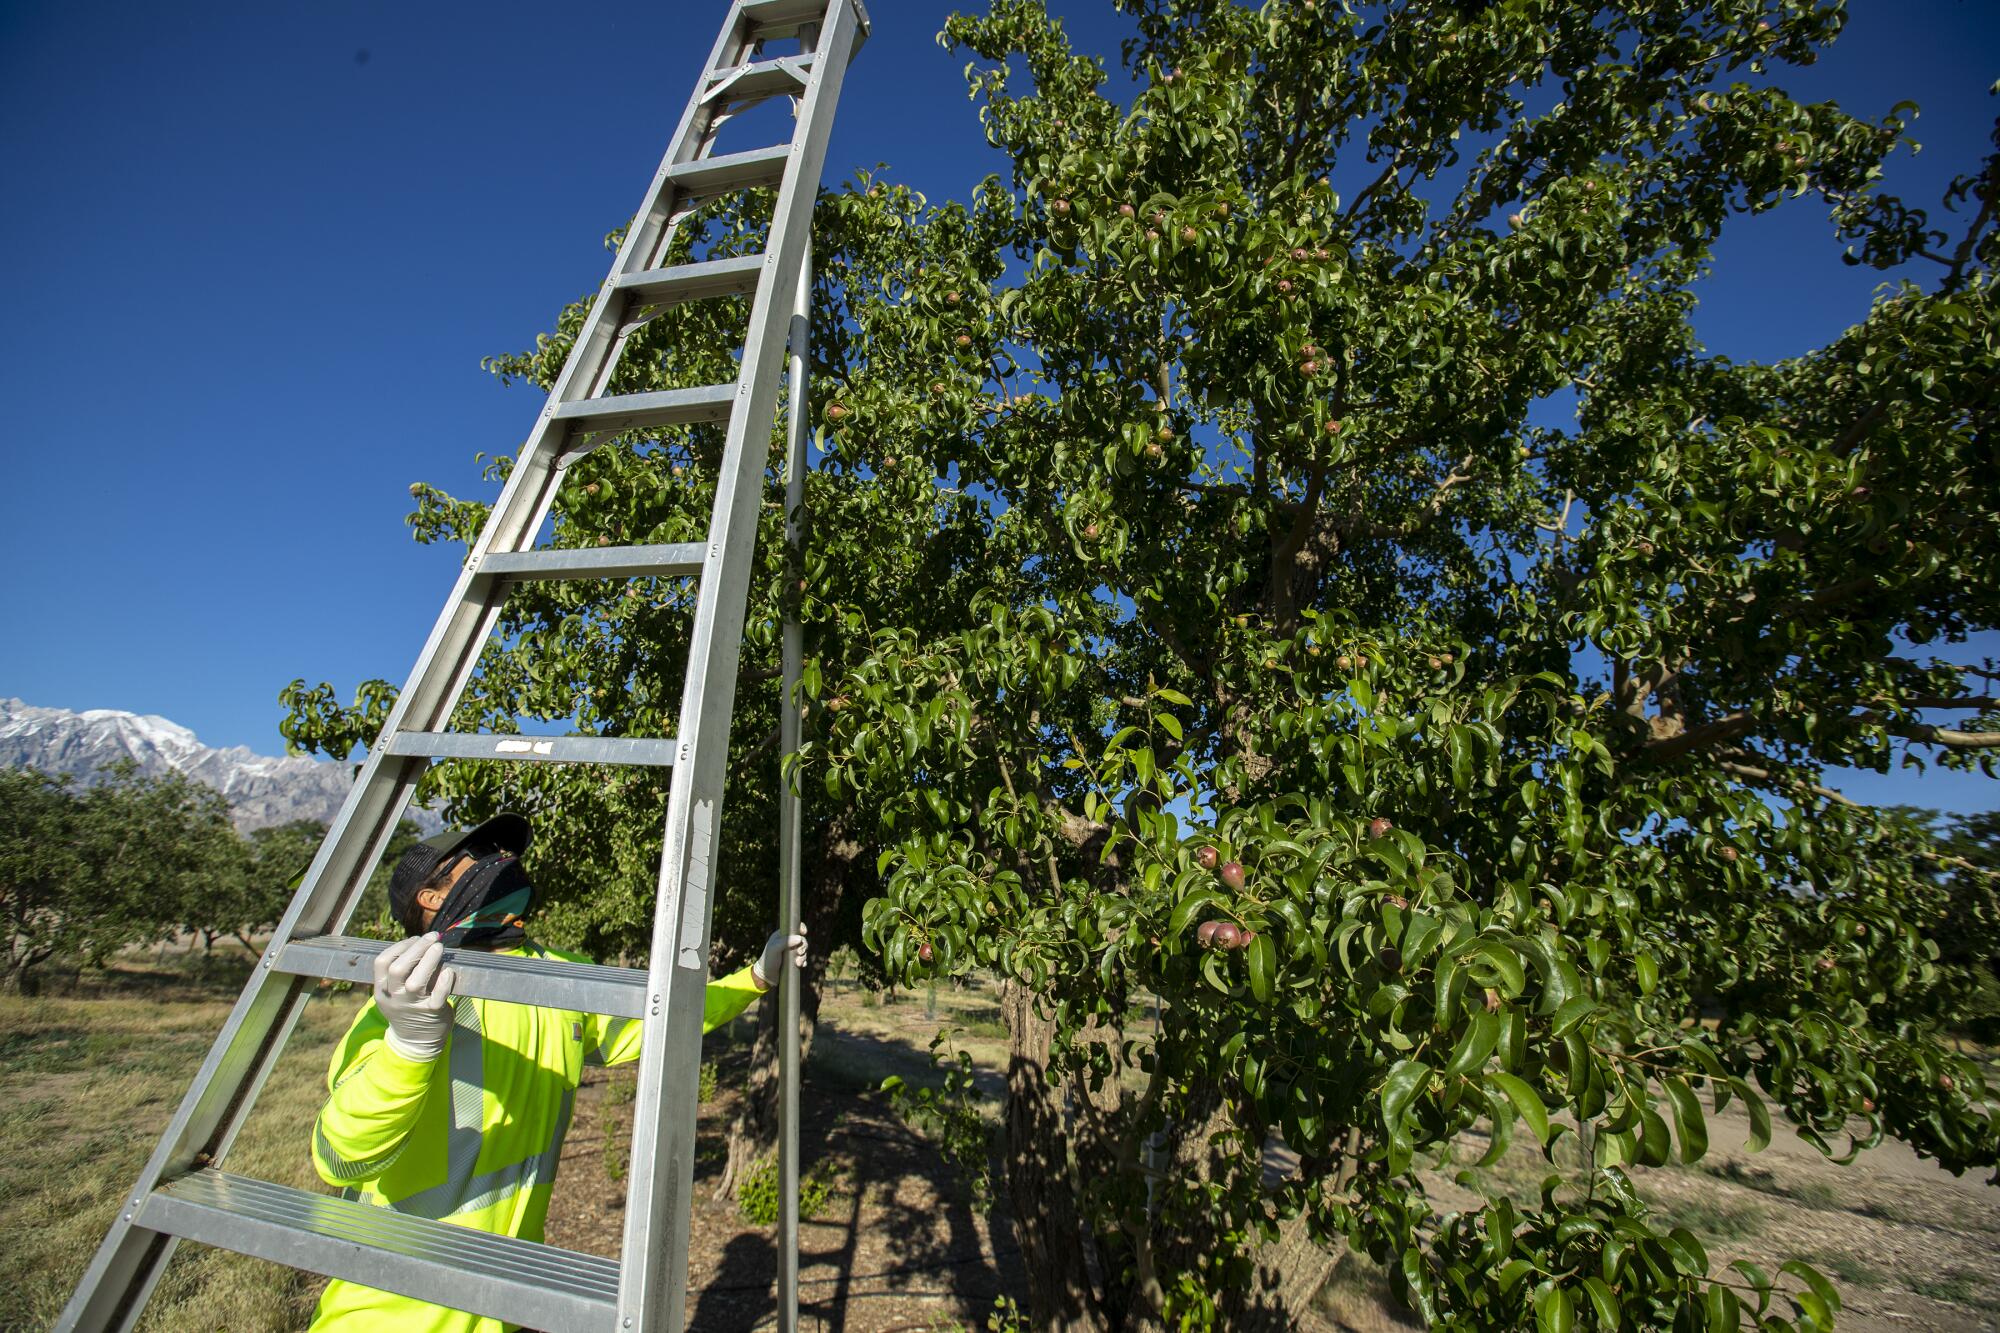 Manzanar National Historic Site arborist Dave Goto sets up a 15-foot ladder to inspect pear trees for fire blight.